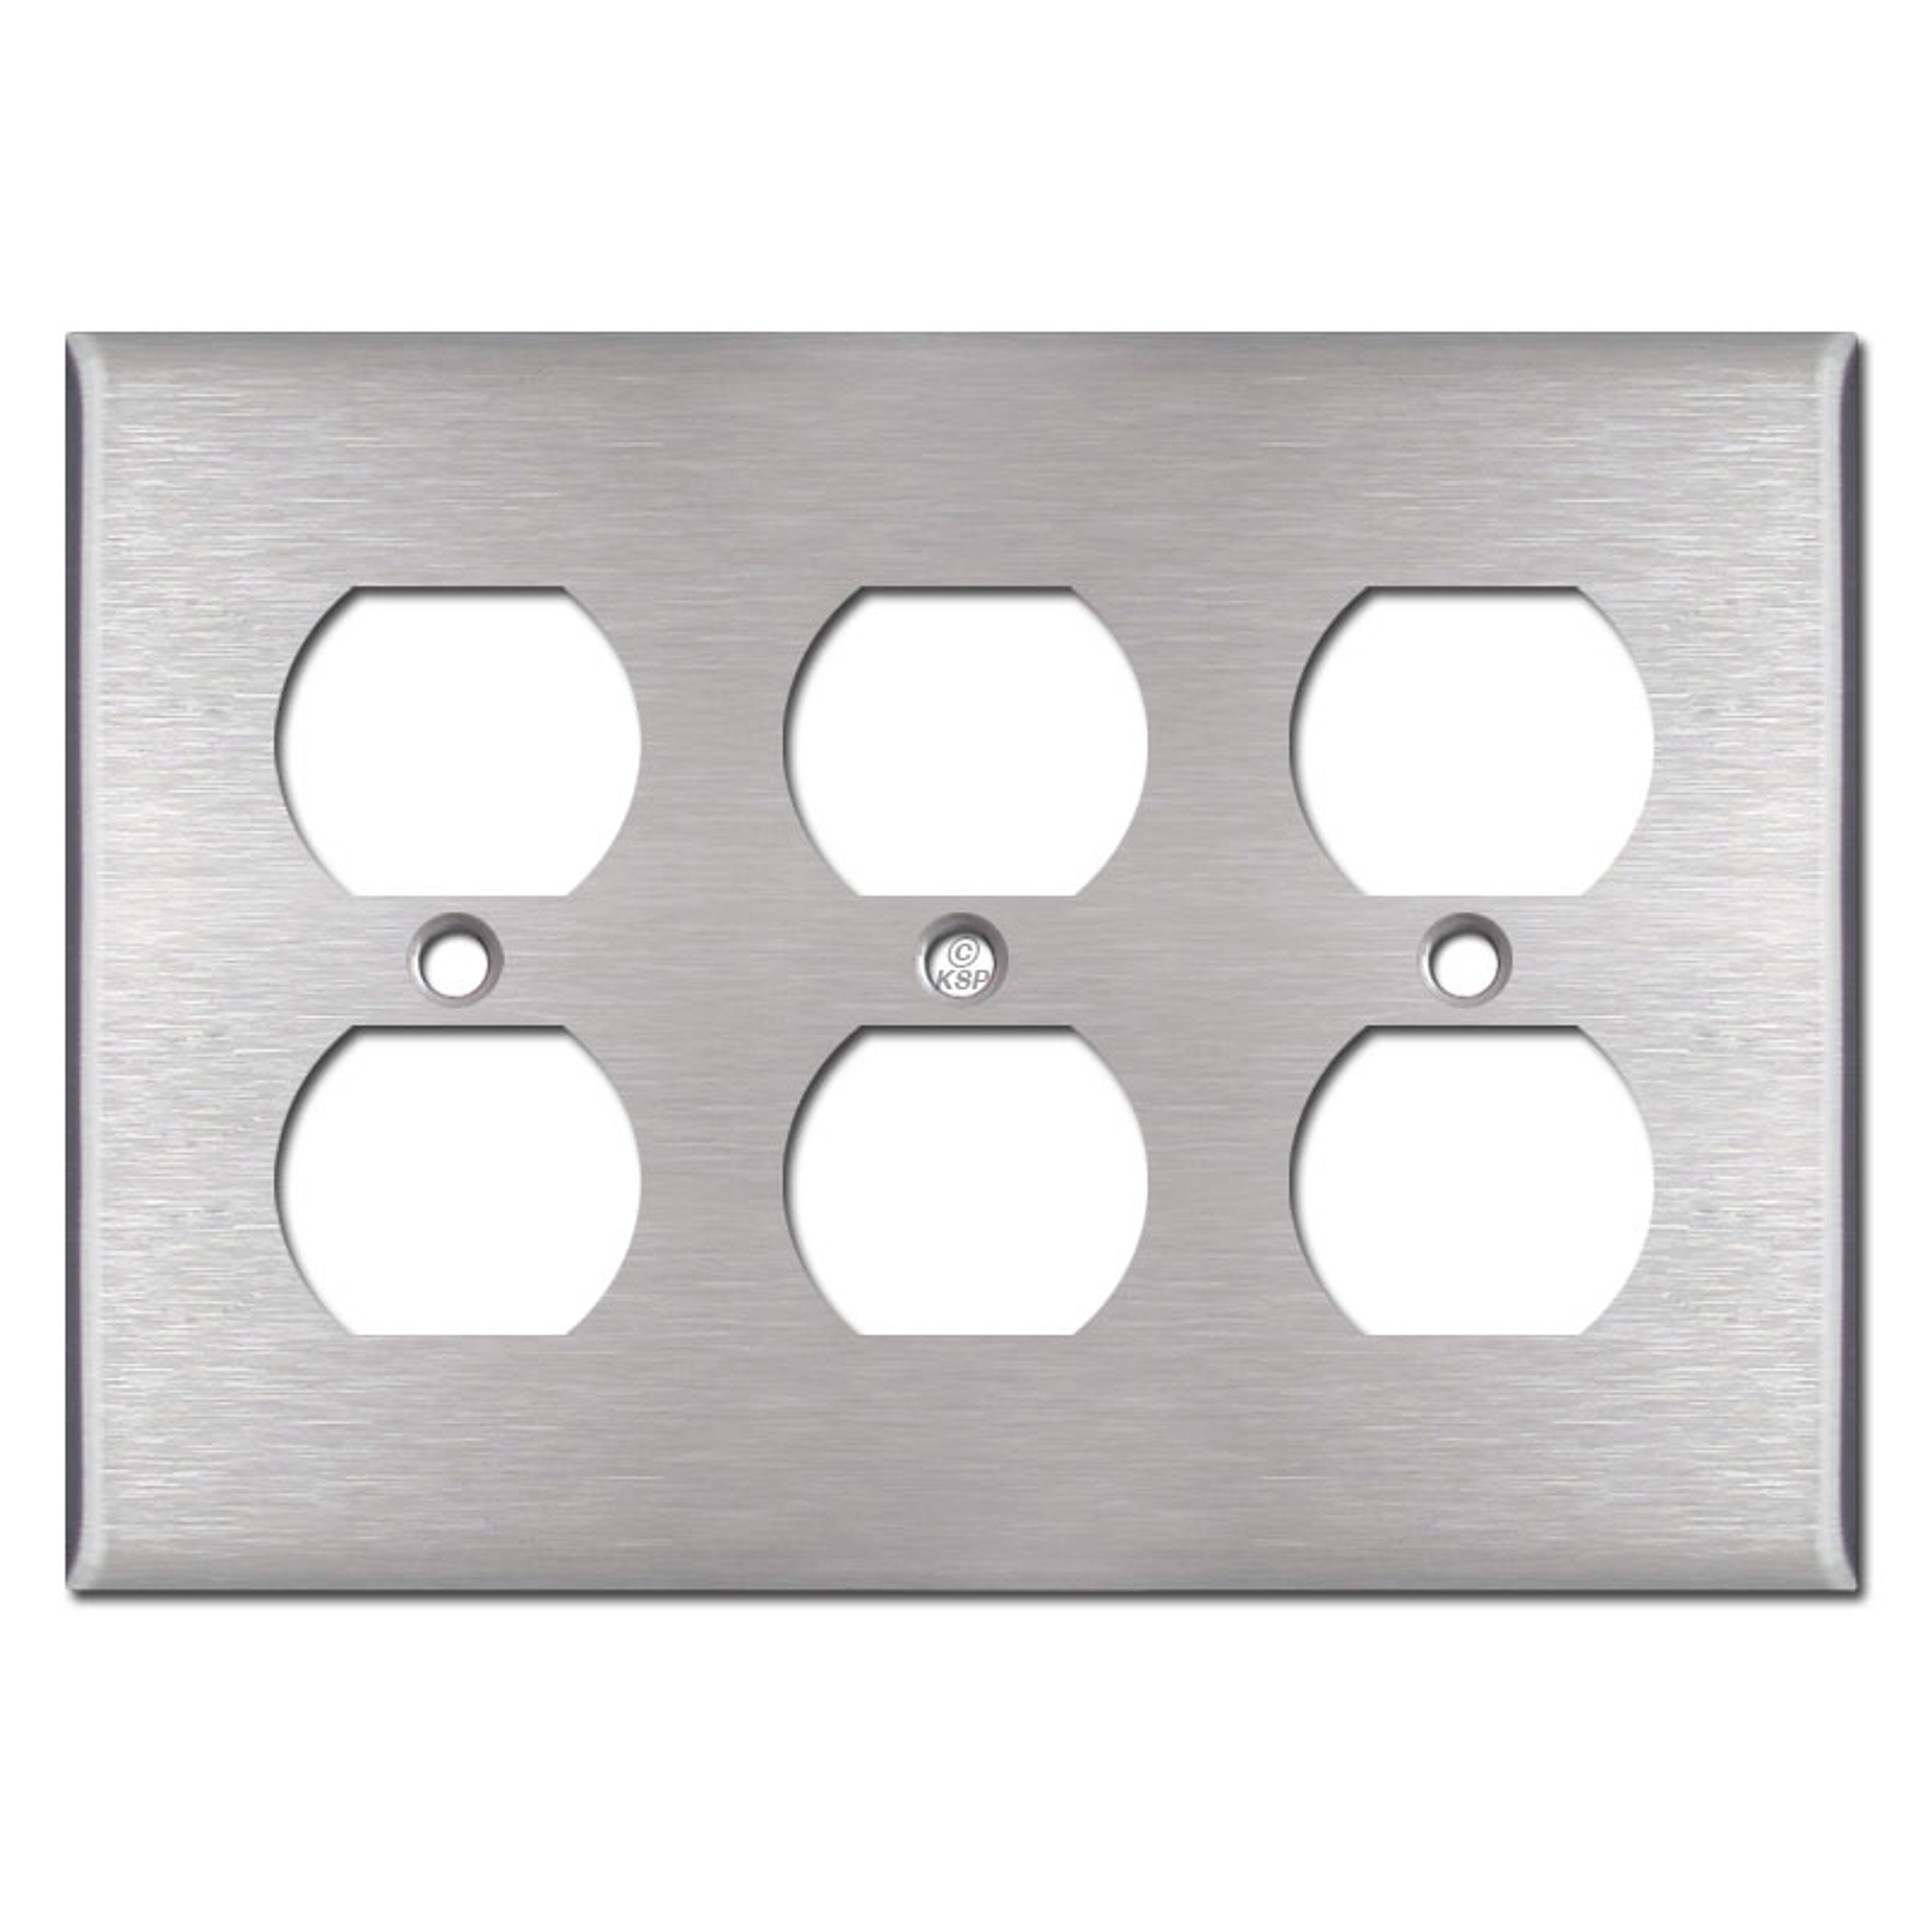 3 Outlet Cover Plates Spec Grade Stainless Steel